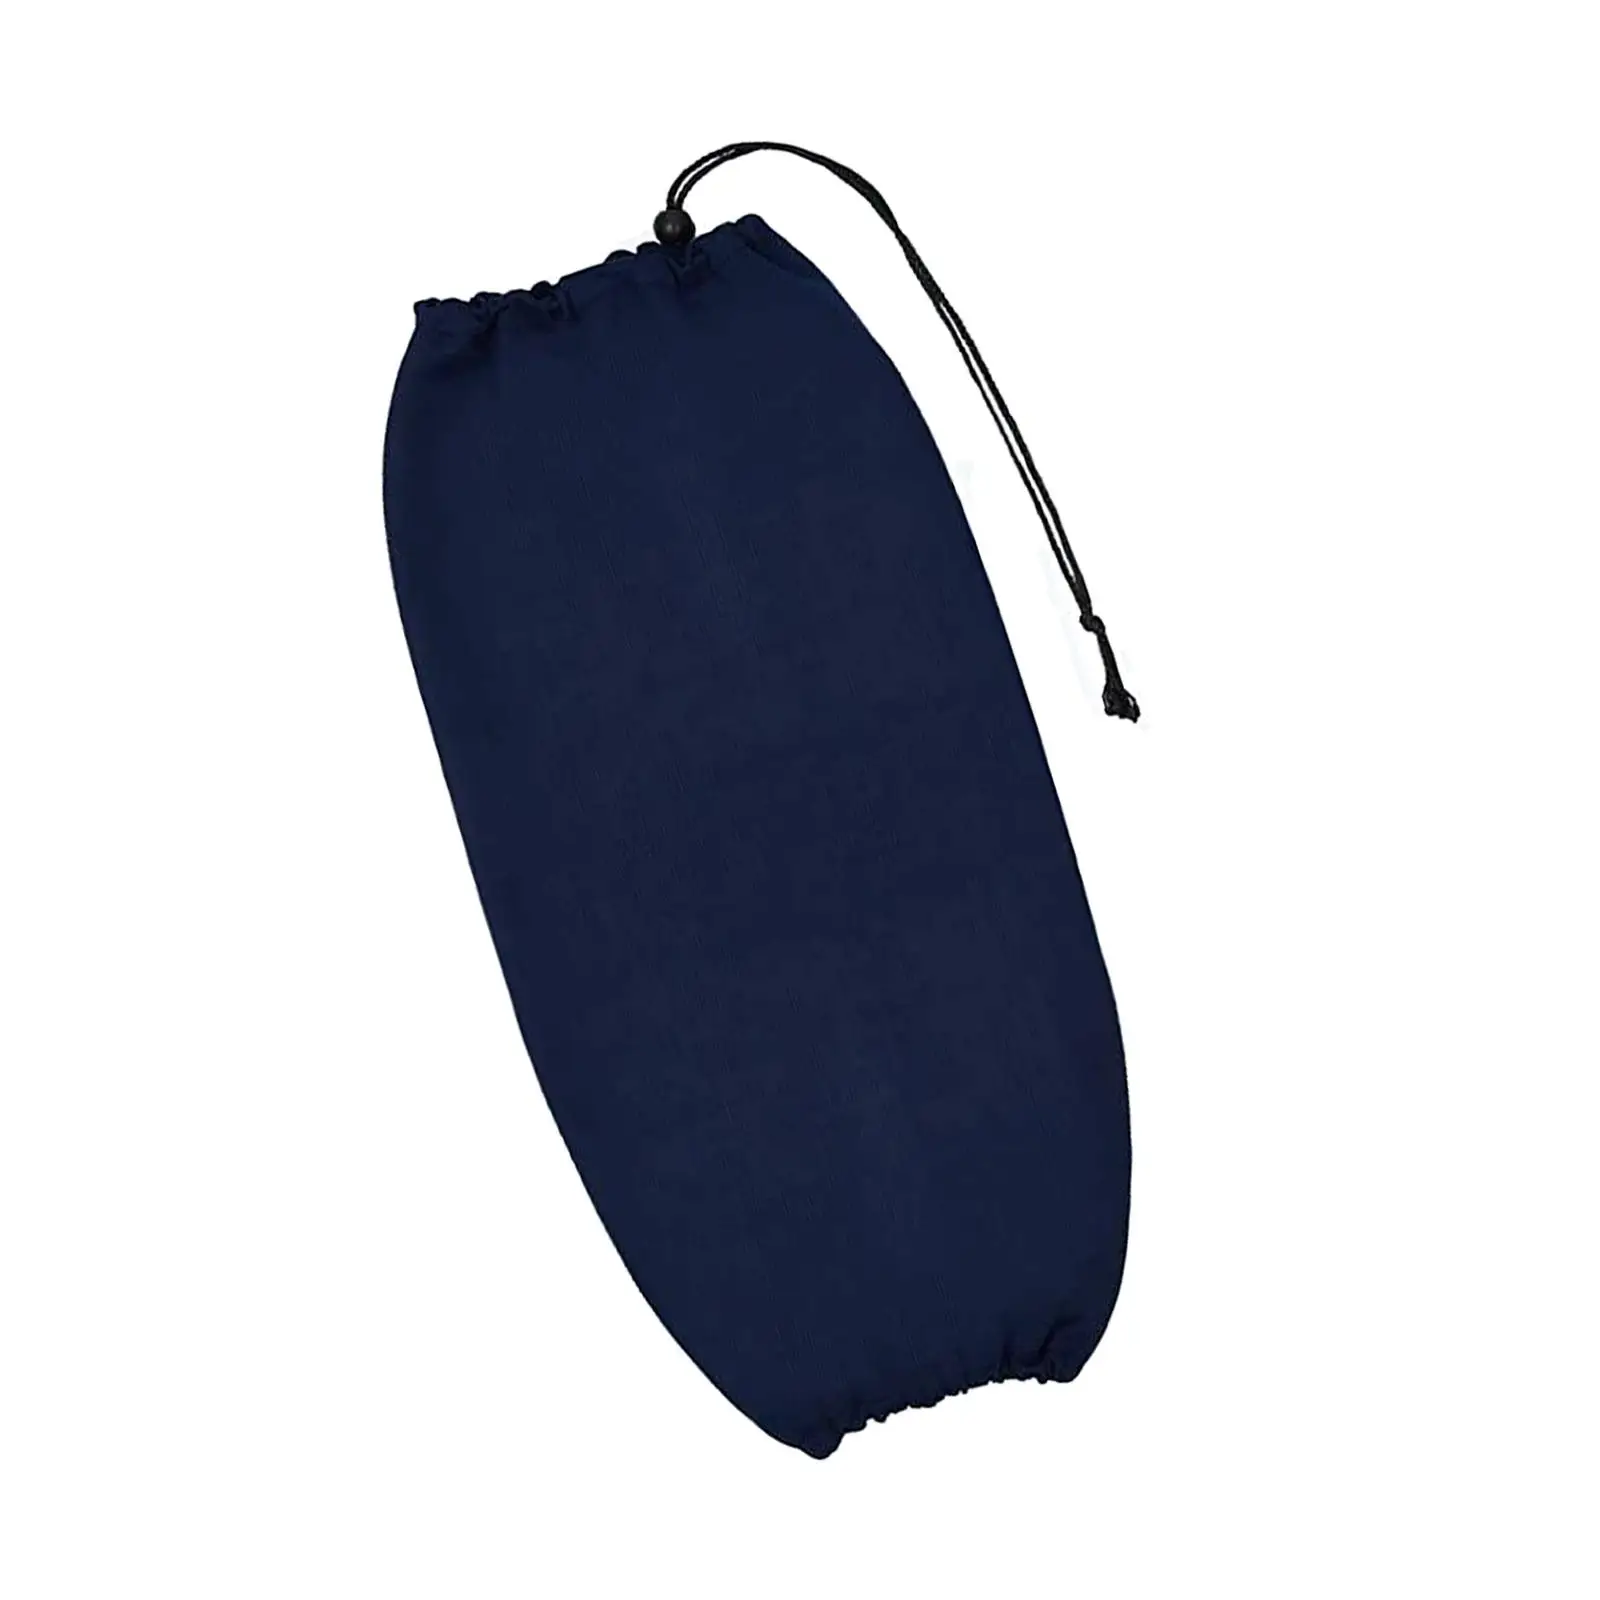 Boat Fender Cover Wear Resistant Washable Easy to Use Sailing Durable Accessories with Tighten Drawstring Marine Bumper Cover